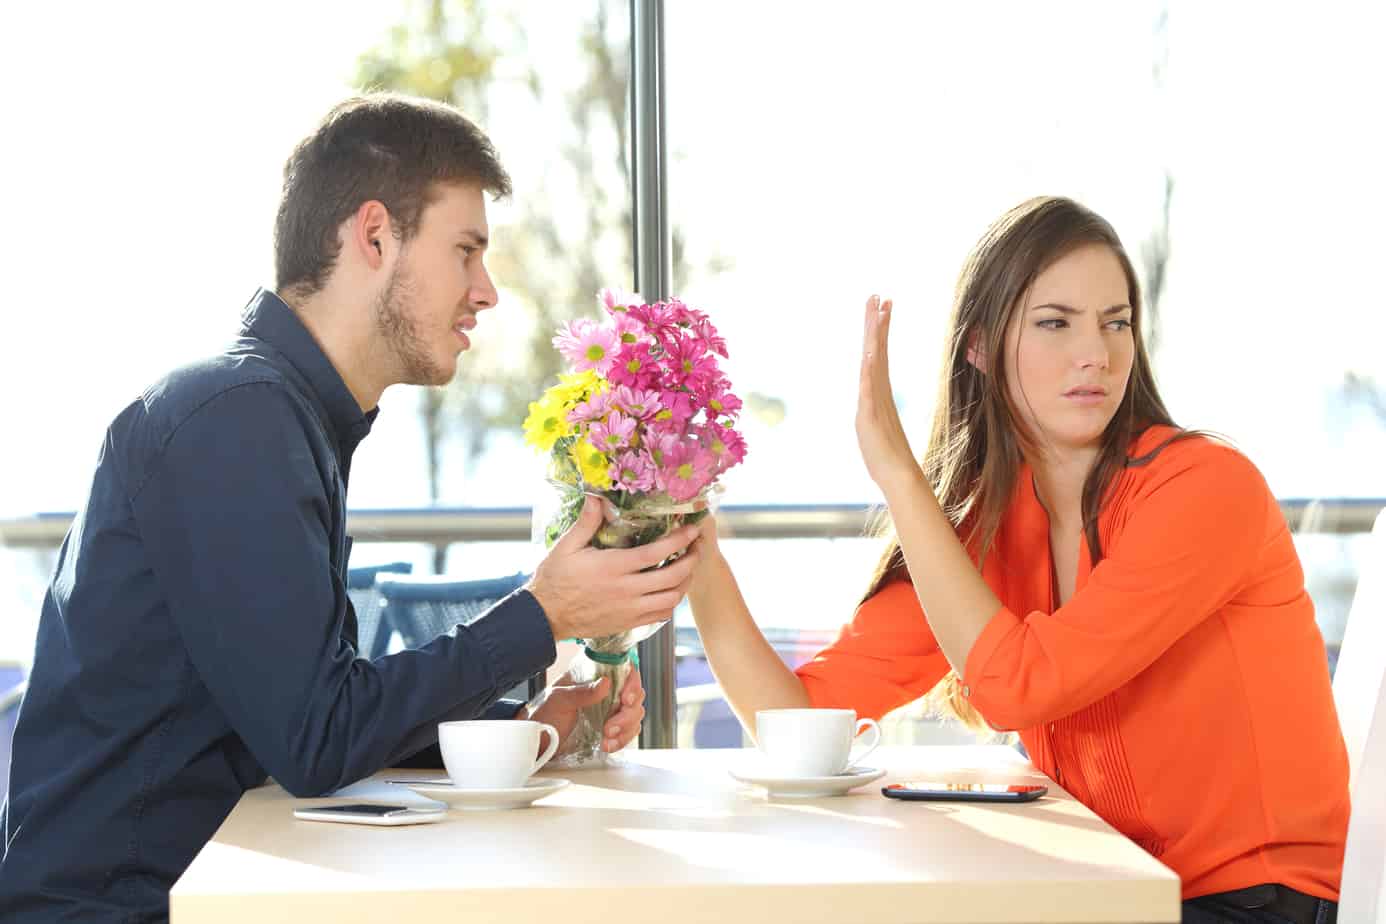 A man giving flowers to a woman at a table